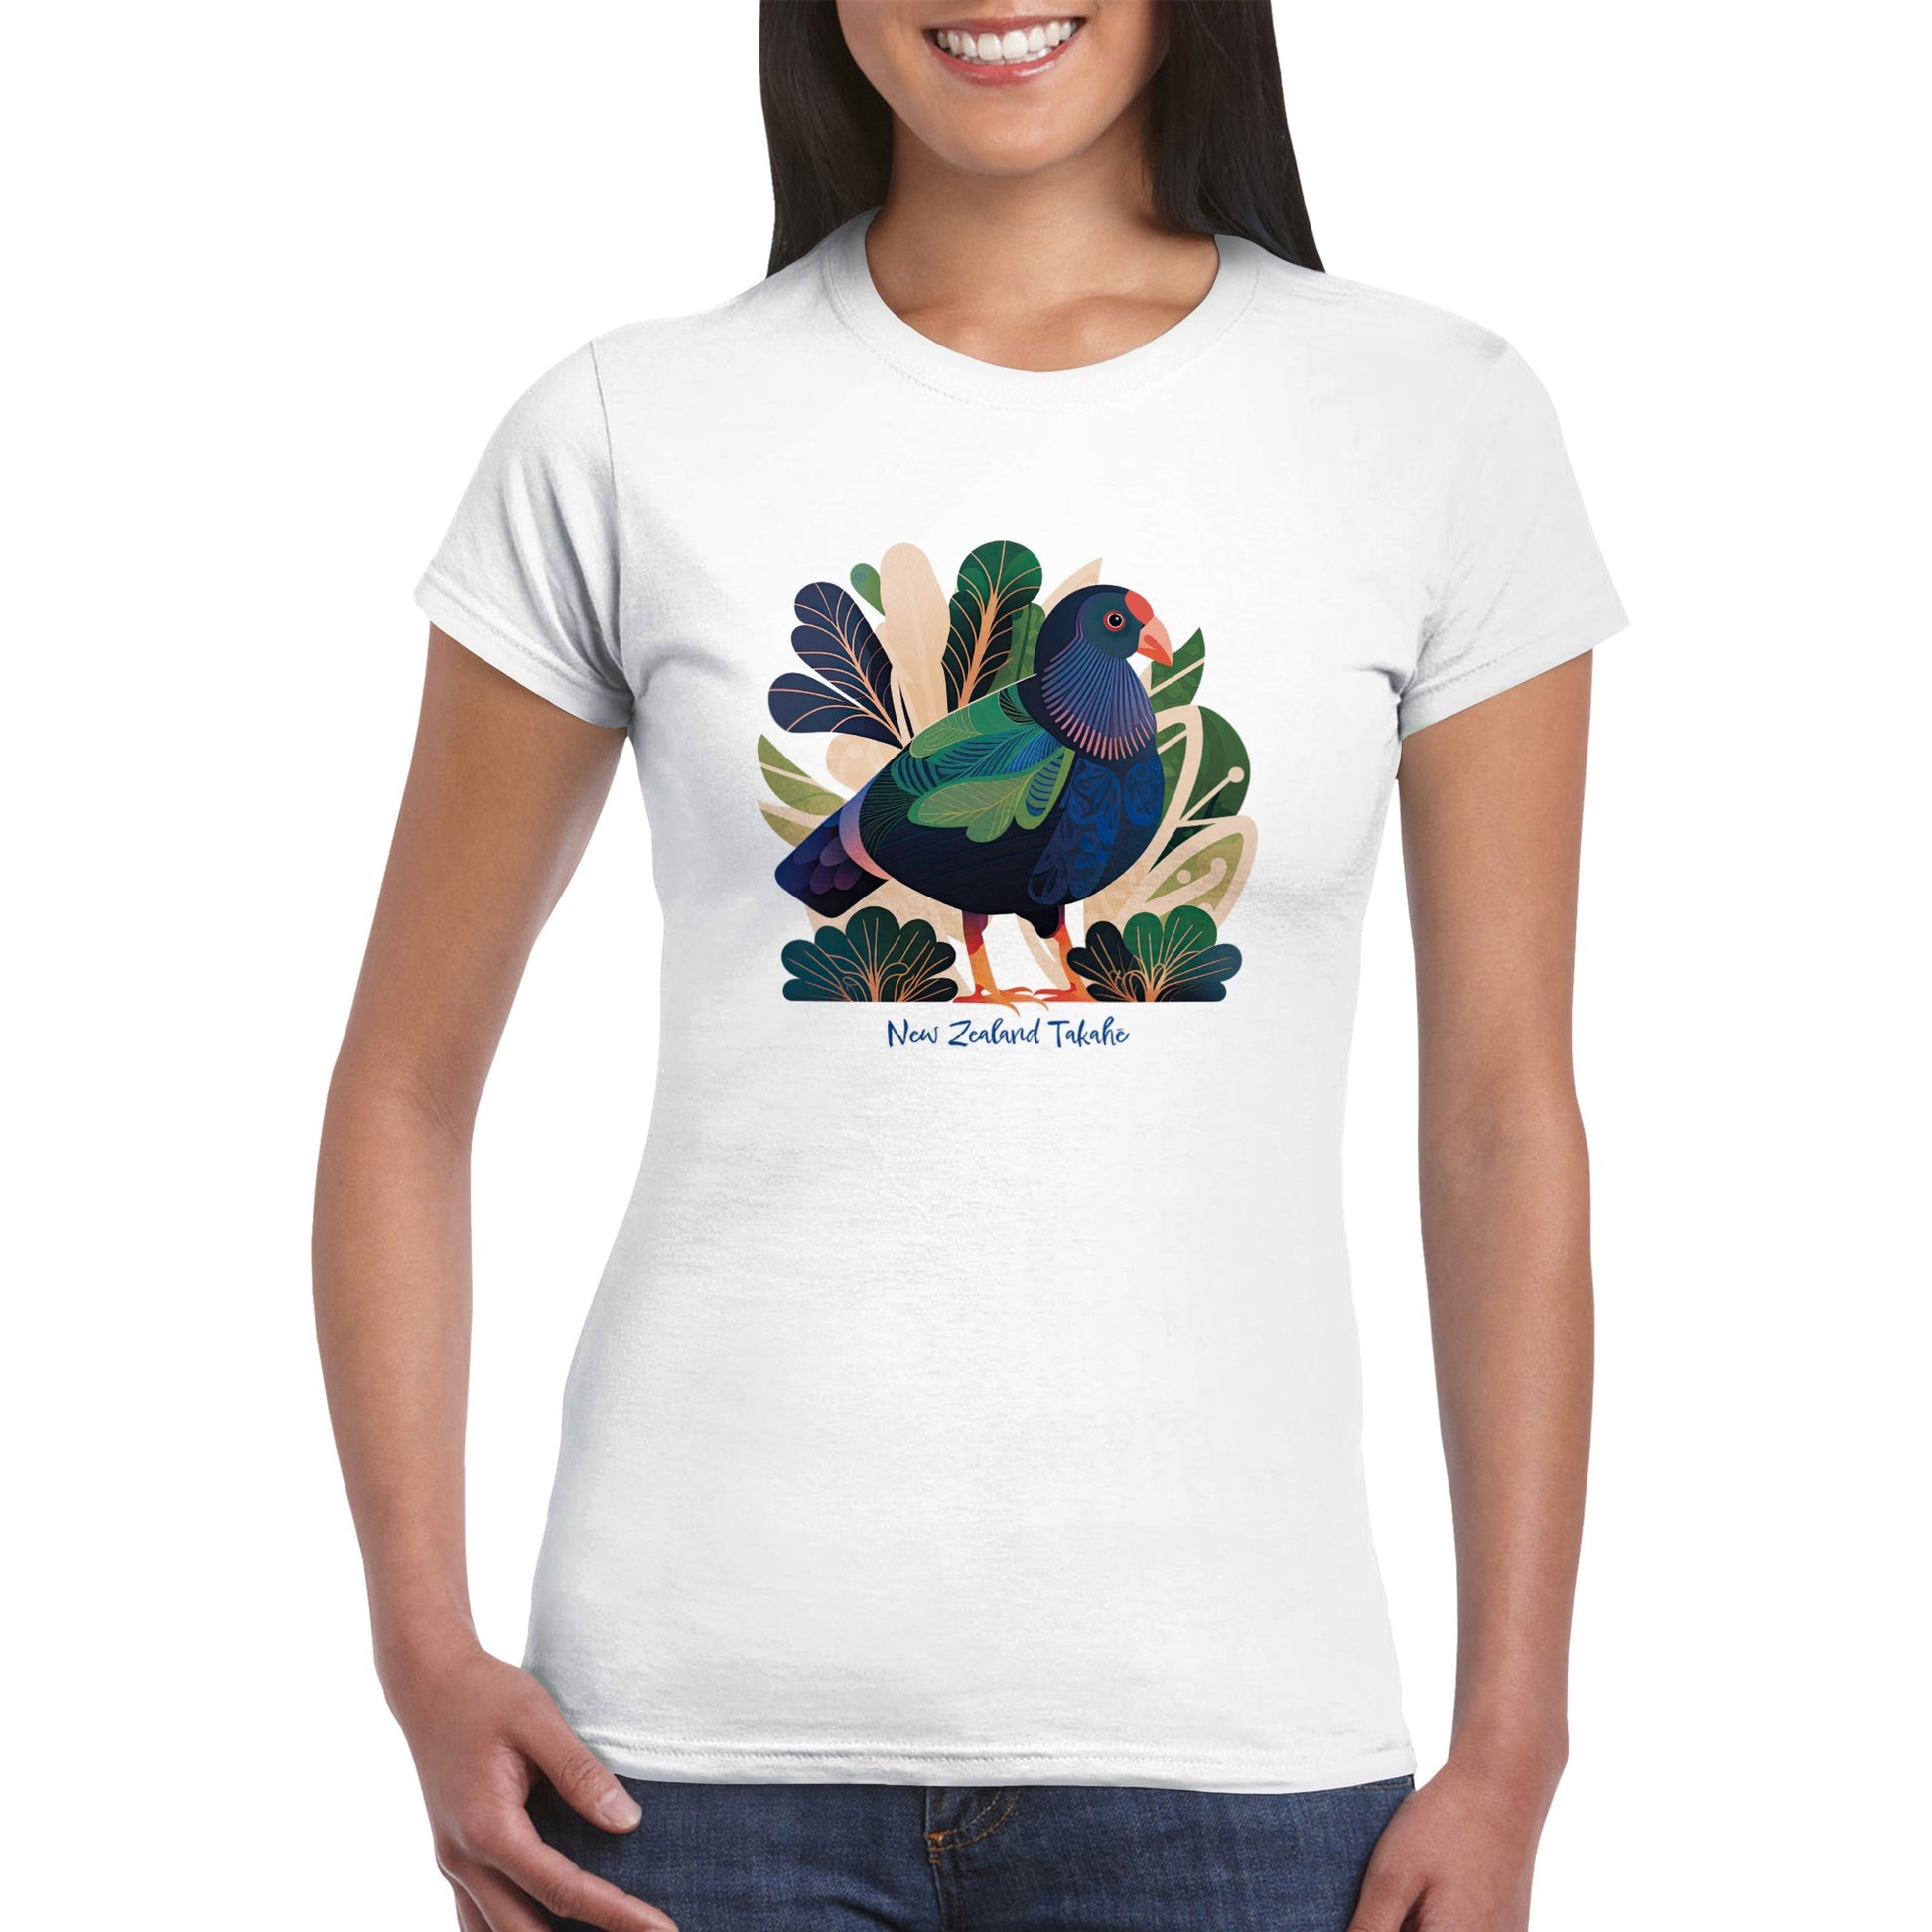 A woman wearing a white t-shirt with a new zealand takahe print